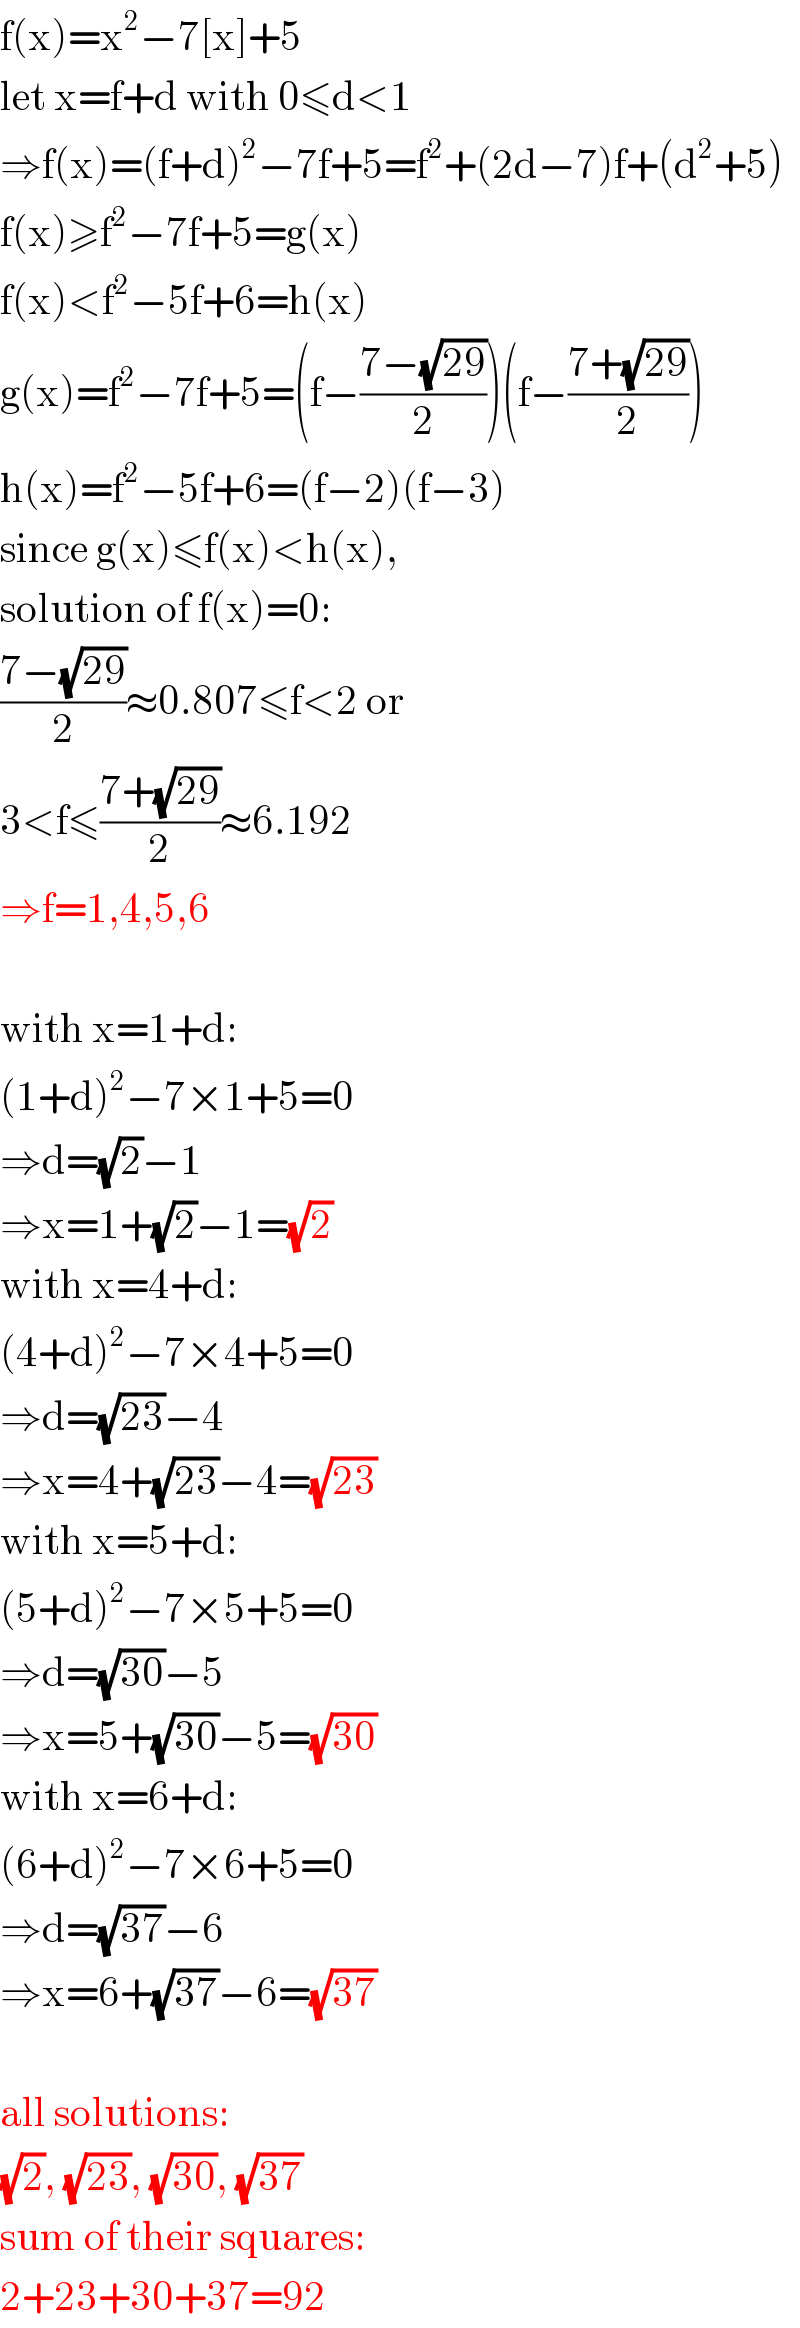 f(x)=x^2 −7[x]+5  let x=f+d with 0≤d<1  ⇒f(x)=(f+d)^2 −7f+5=f^2 +(2d−7)f+(d^2 +5)  f(x)≥f^2 −7f+5=g(x)  f(x)<f^2 −5f+6=h(x)  g(x)=f^2 −7f+5=(f−((7−(√(29)))/2))(f−((7+(√(29)))/2))  h(x)=f^2 −5f+6=(f−2)(f−3)  since g(x)≤f(x)<h(x),  solution of f(x)=0:  ((7−(√(29)))/2)≈0.807≤f<2 or  3<f≤((7+(√(29)))/2)≈6.192  ⇒f=1,4,5,6    with x=1+d:  (1+d)^2 −7×1+5=0  ⇒d=(√2)−1  ⇒x=1+(√2)−1=(√2)  with x=4+d:  (4+d)^2 −7×4+5=0  ⇒d=(√(23))−4  ⇒x=4+(√(23))−4=(√(23))  with x=5+d:  (5+d)^2 −7×5+5=0  ⇒d=(√(30))−5  ⇒x=5+(√(30))−5=(√(30))  with x=6+d:  (6+d)^2 −7×6+5=0  ⇒d=(√(37))−6  ⇒x=6+(√(37))−6=(√(37))    all solutions:  (√2), (√(23)), (√(30)), (√(37))  sum of their squares:  2+23+30+37=92  